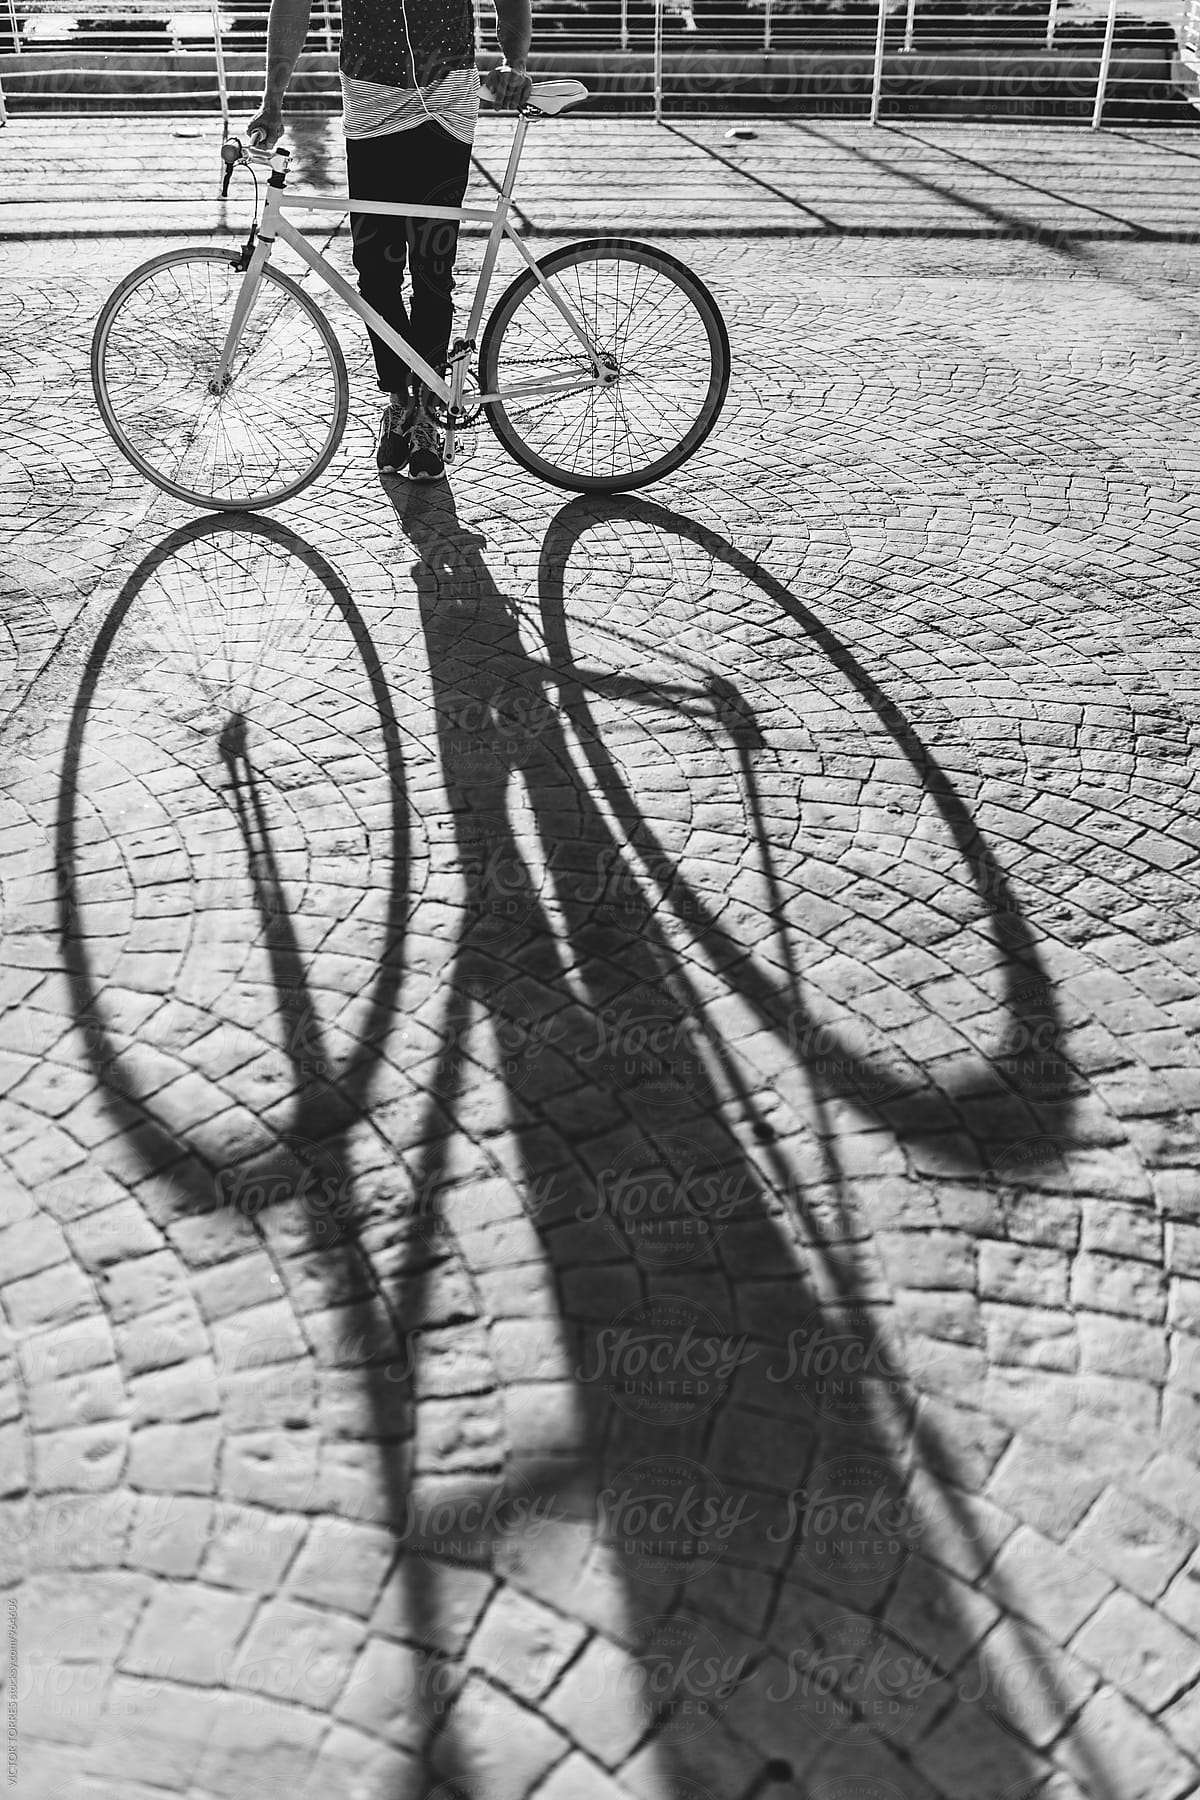 Shadow of a Bicycle on a Cobblestone Road